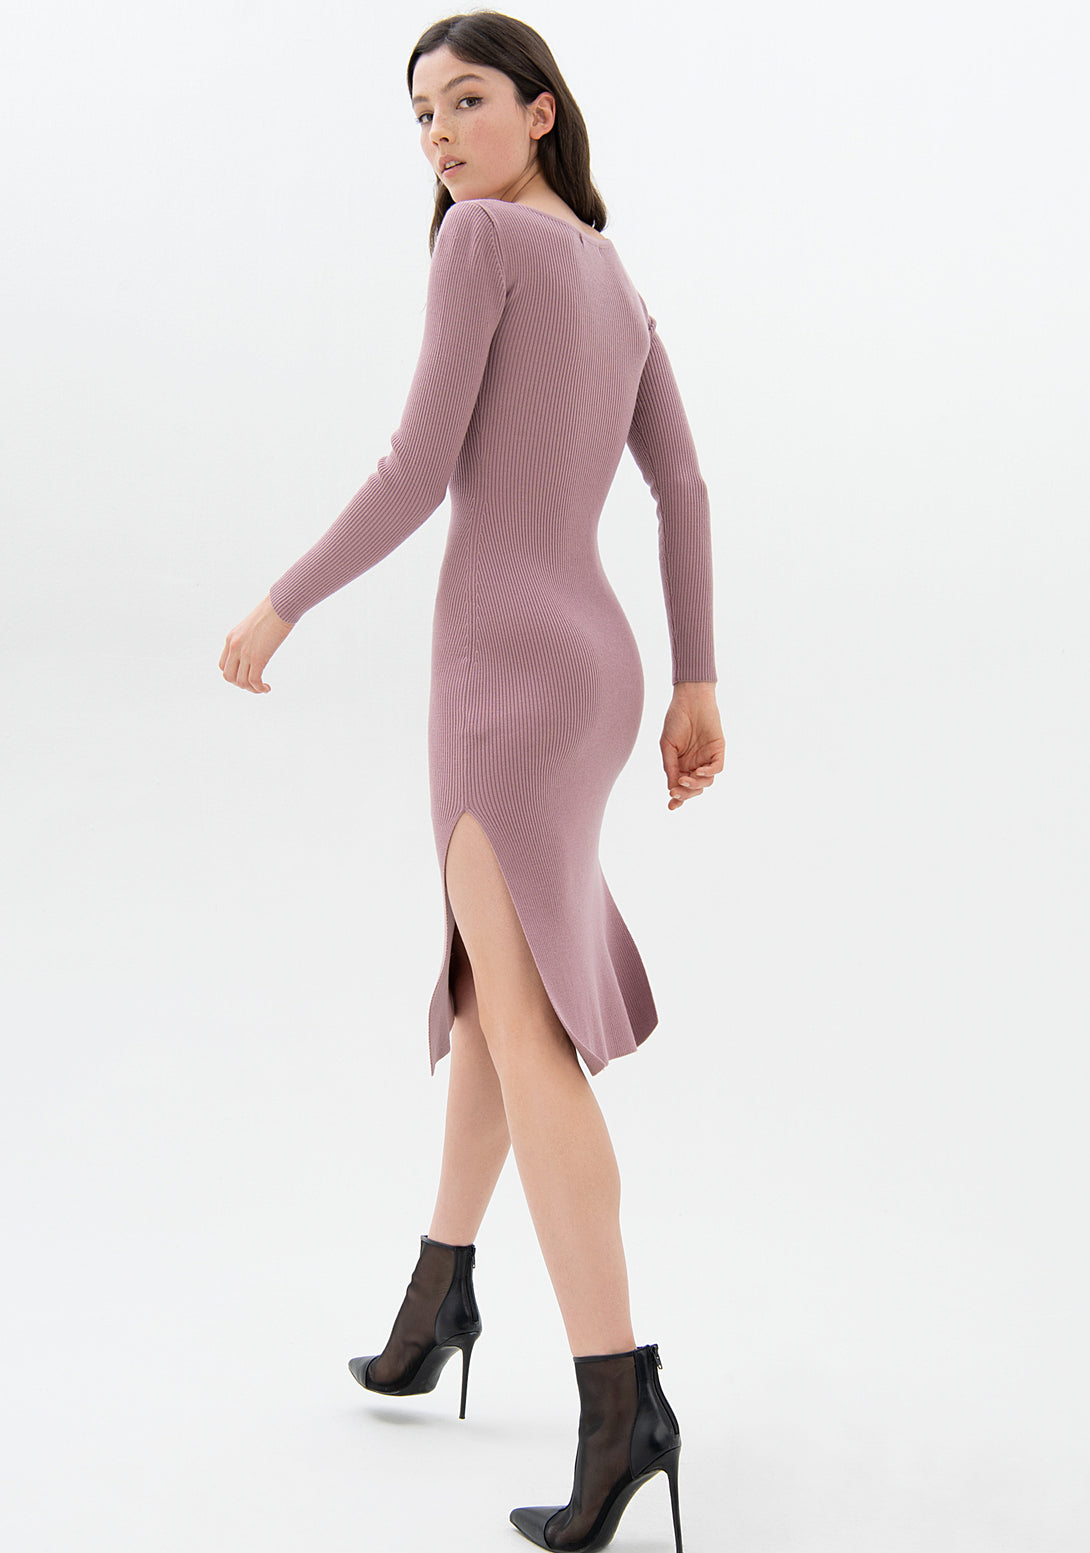 Knitted dress tight fit made in wool with rib stitch